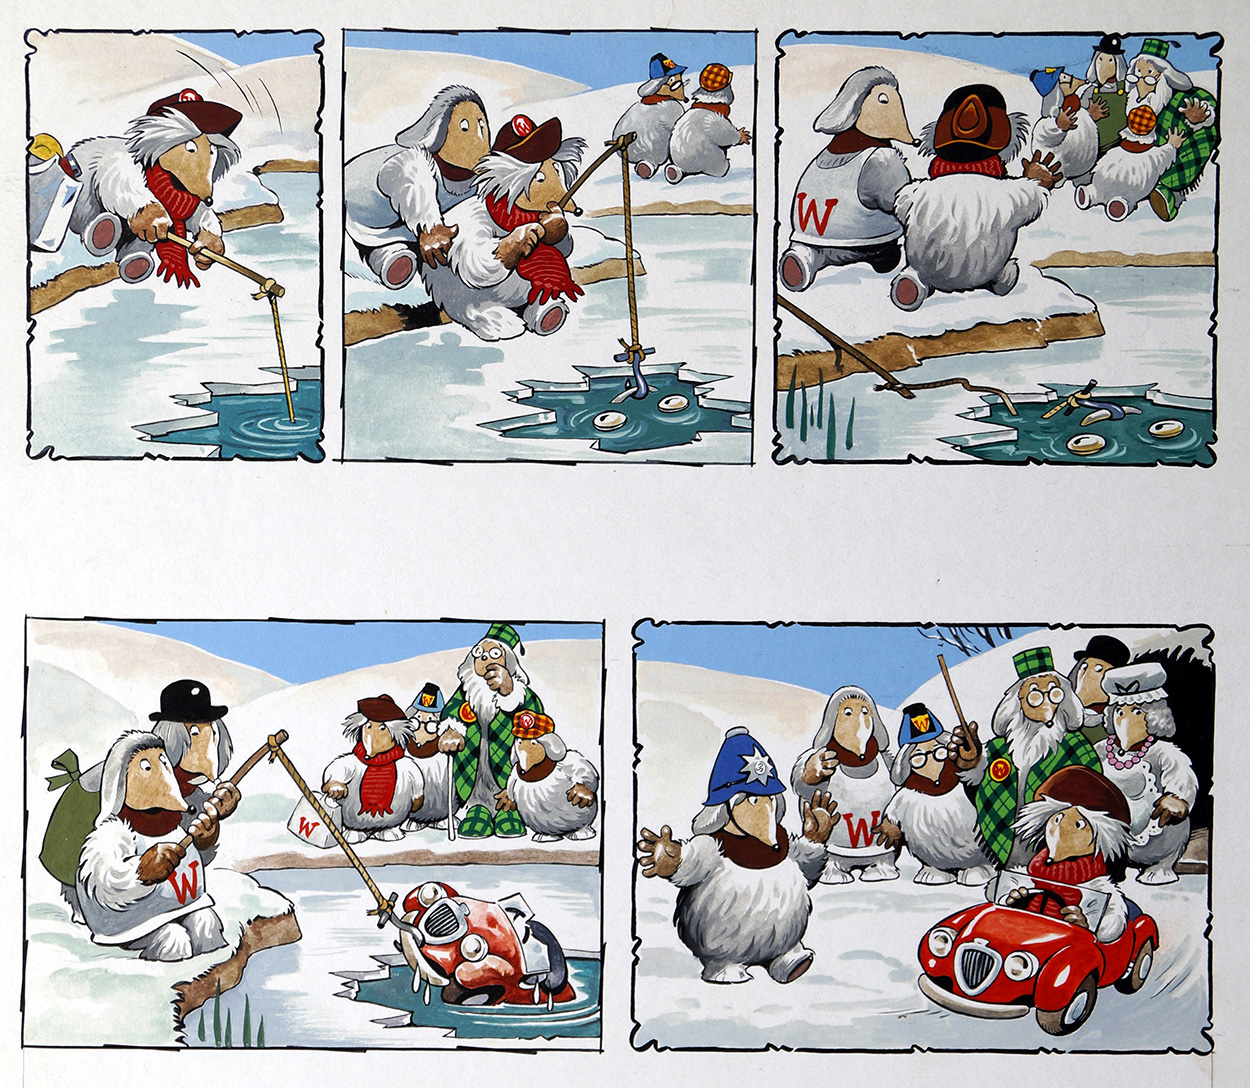 The Wombles - Go Fishing (Original) art by The Wombles (Blasco) at The Illustration Art Gallery